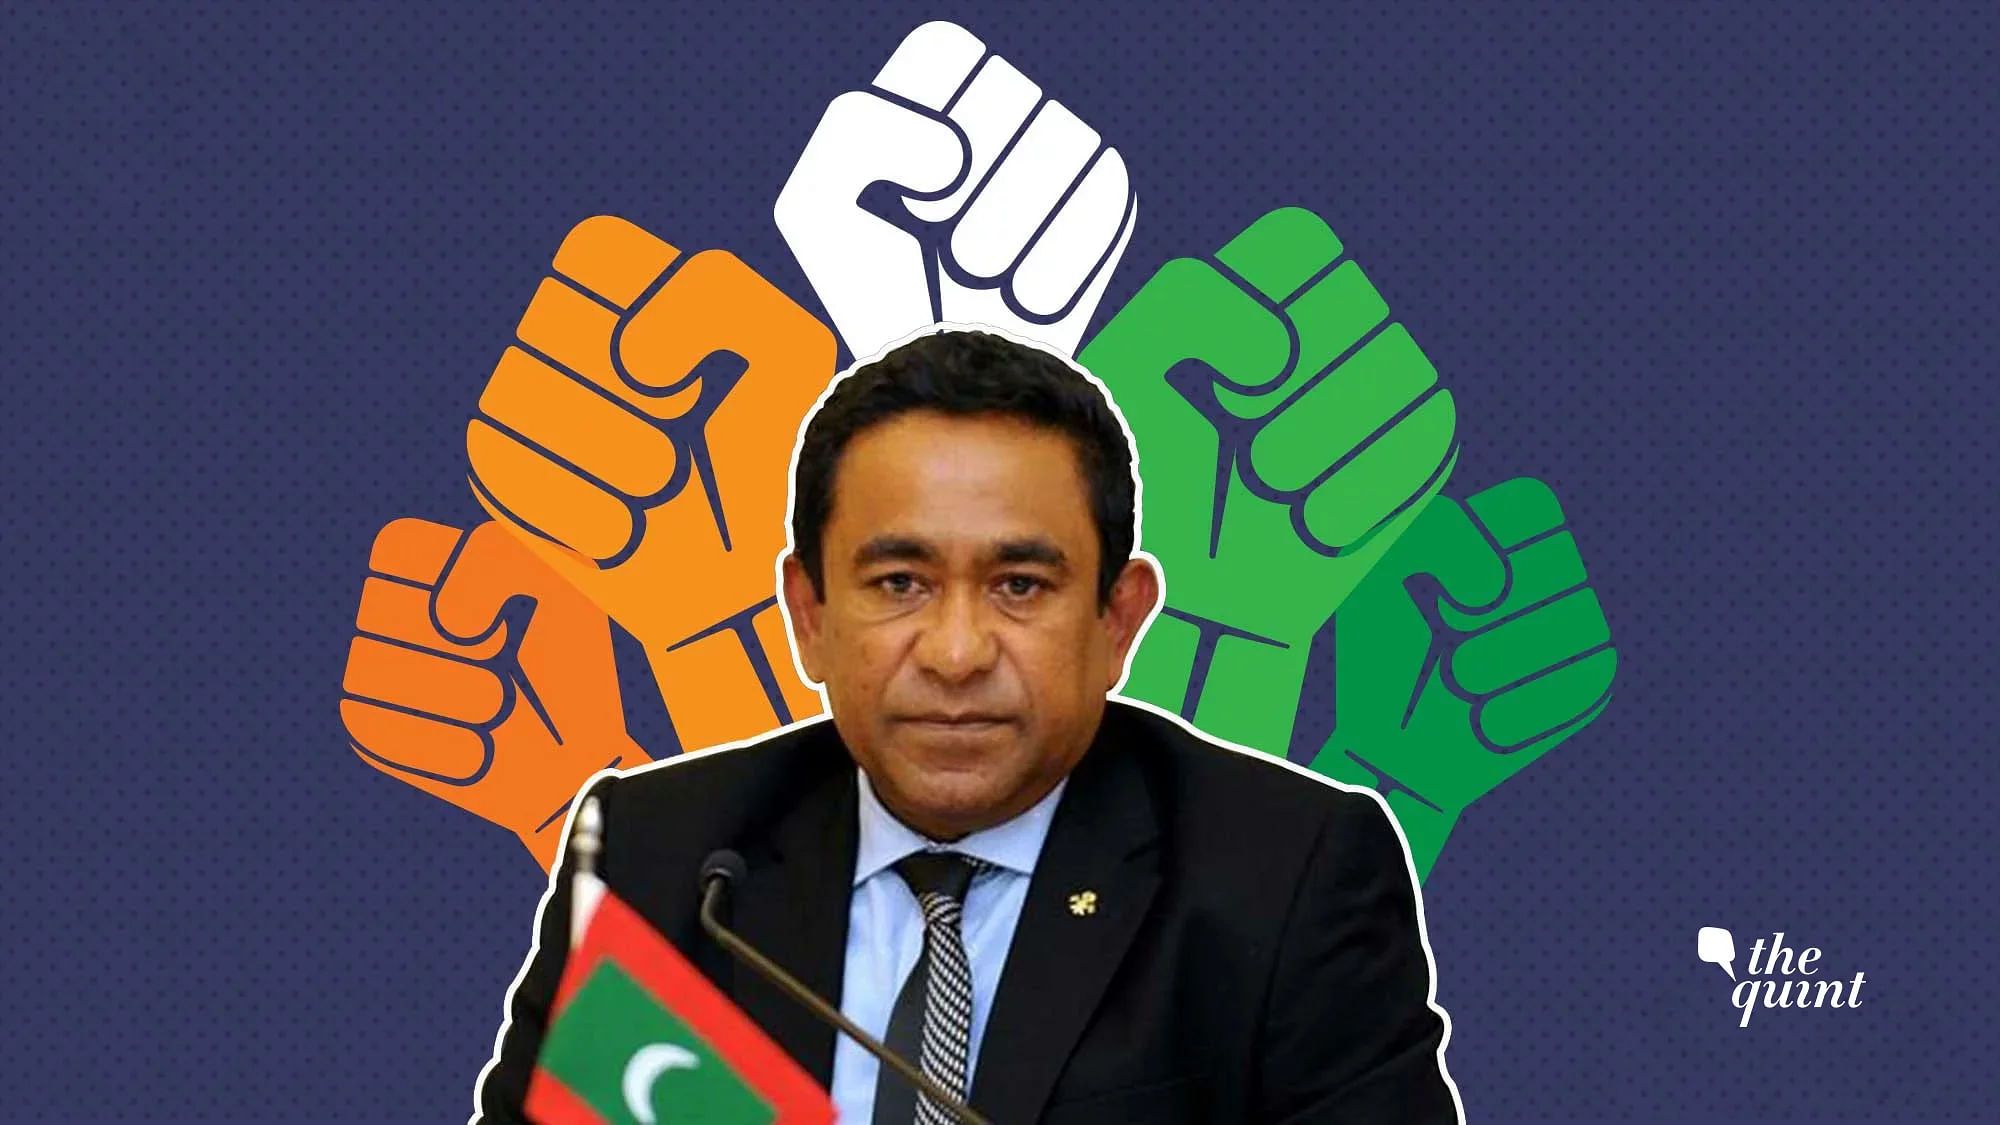 Image of Maldives President used for representational purposes.